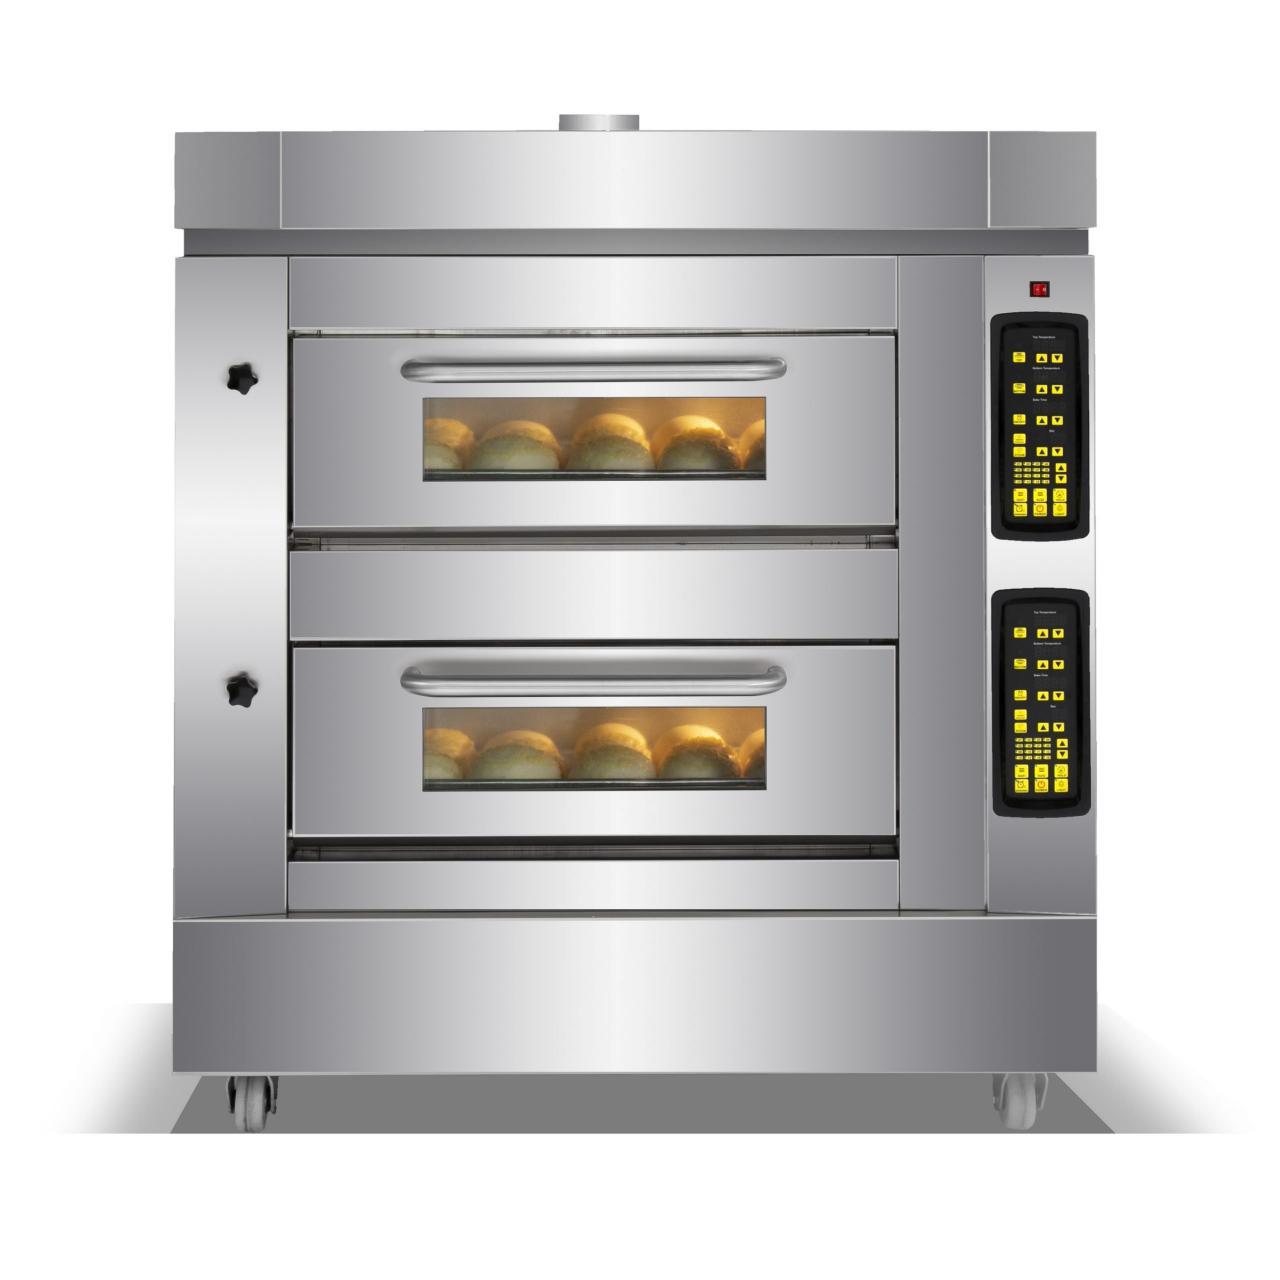 Baking in an electric oven